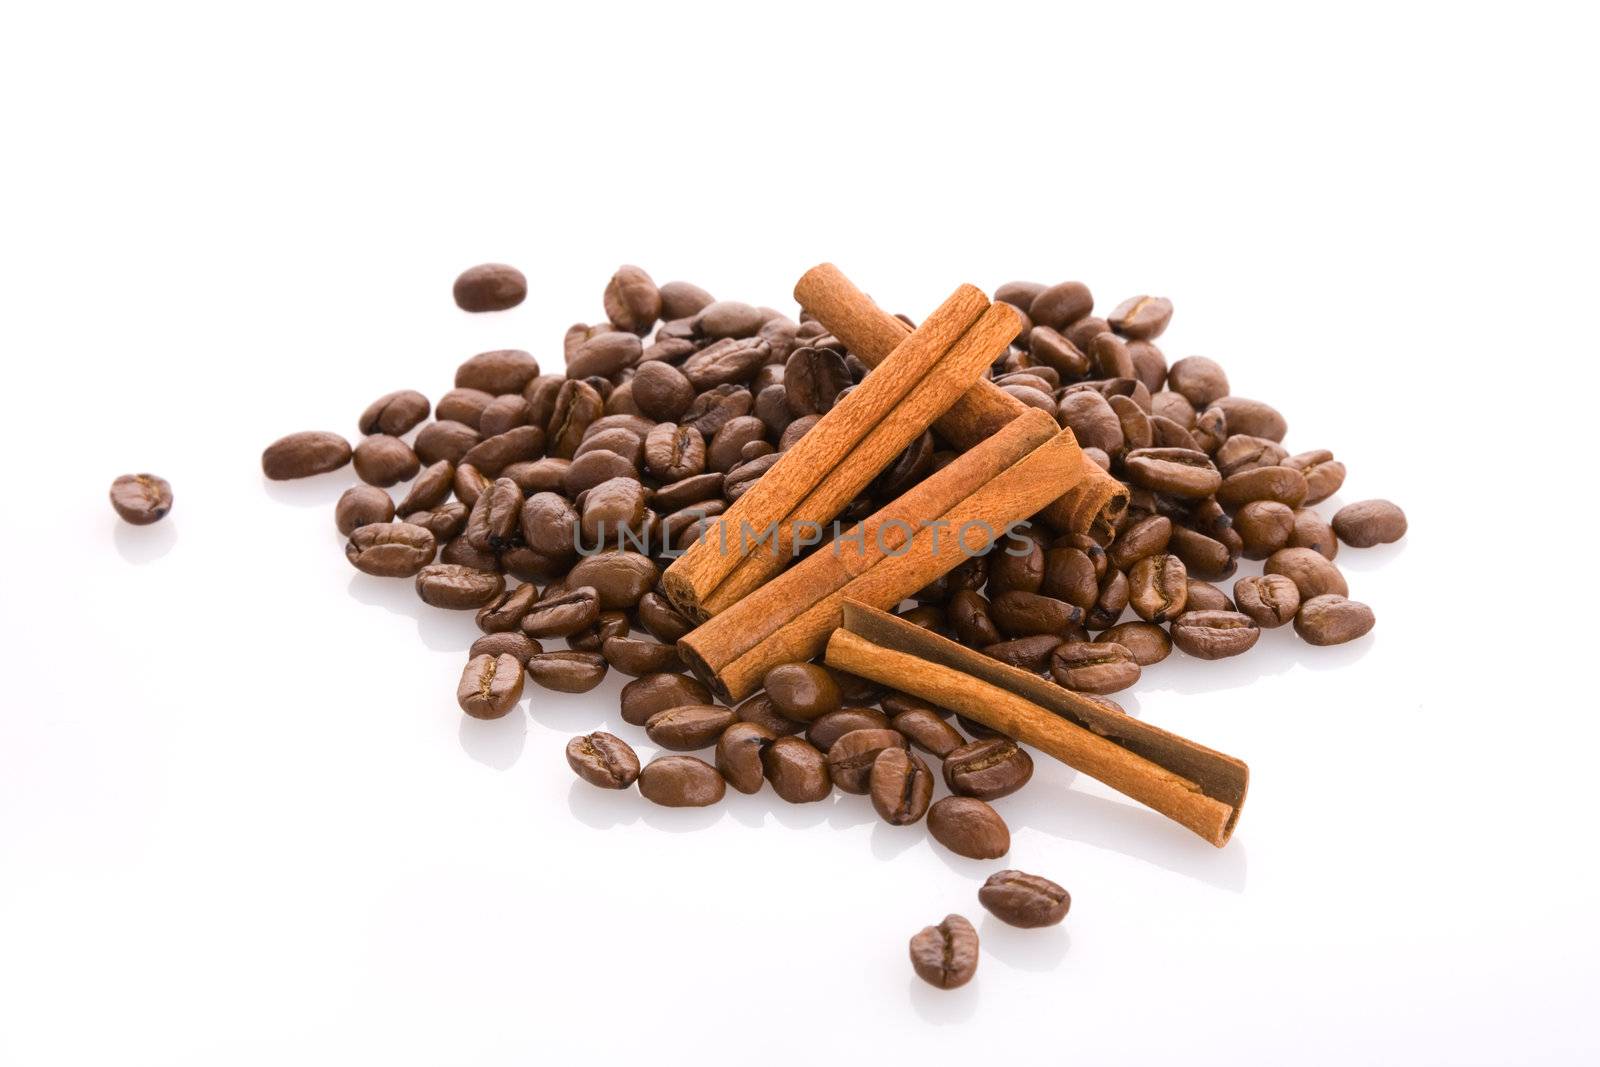 Isolated brown coffee beans and cinnamon sticks